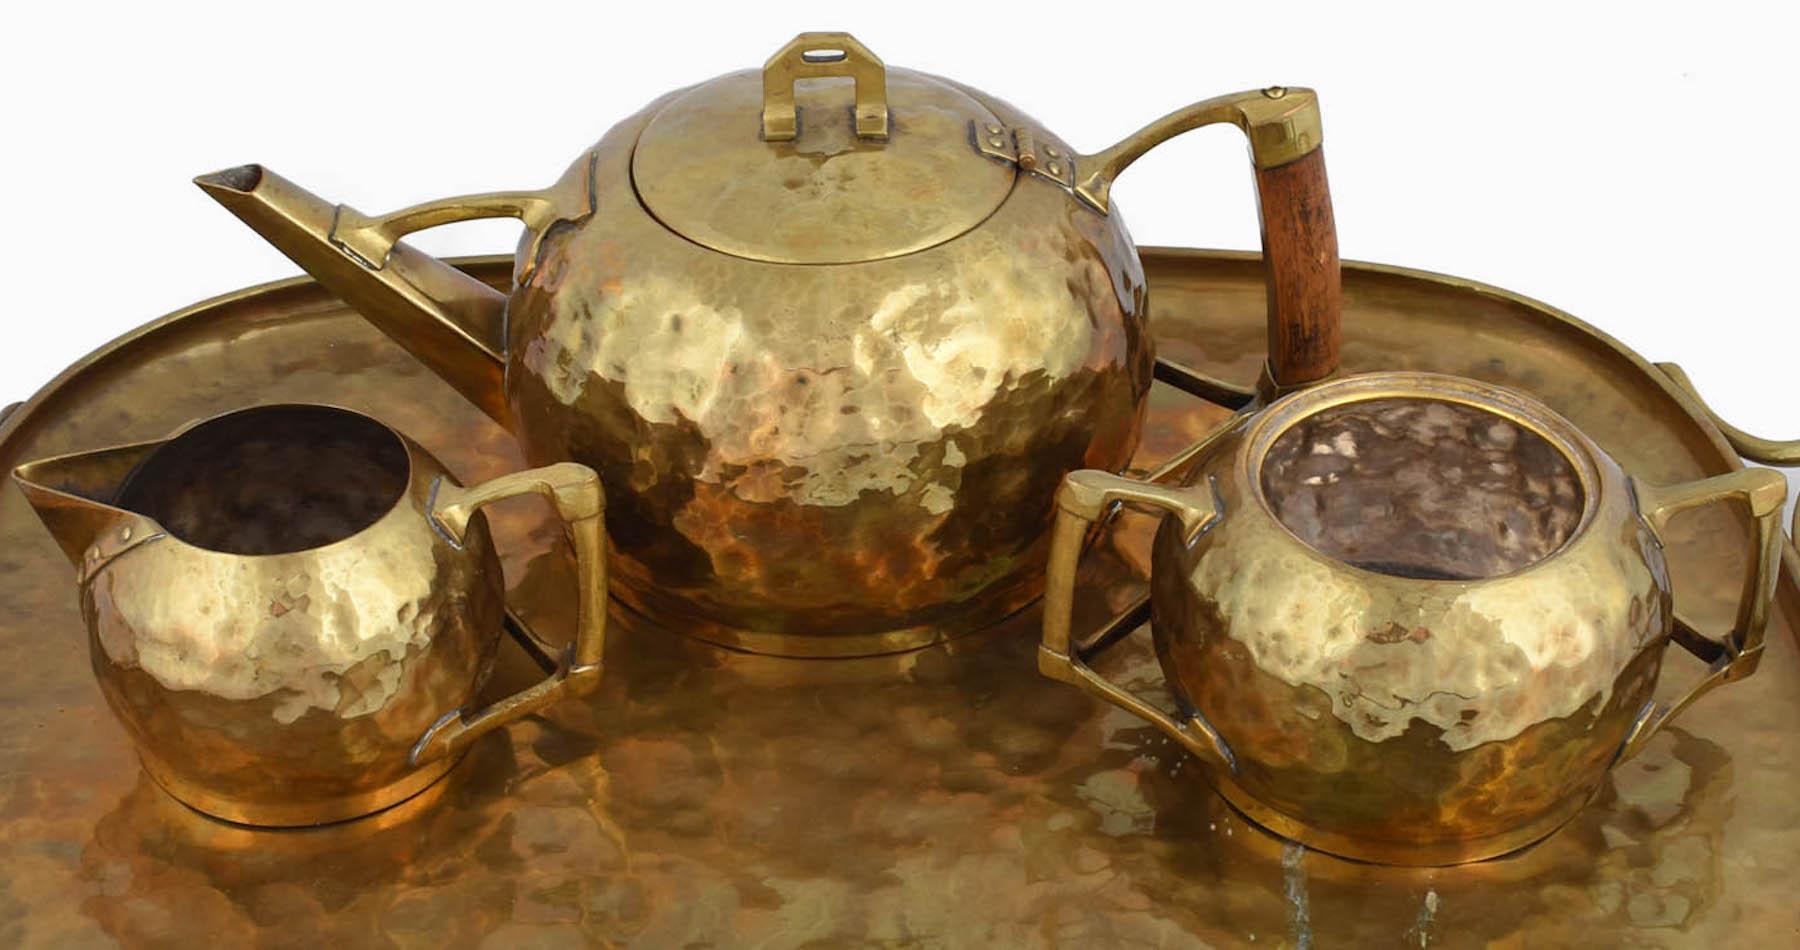 Jugendstil Centrepiece / Teaset with tray is an original decorative object realized in the 1910s. 

Original brass set. 

The centrepiece includes different pieces: a sugar bowl, a mikl bowl, a teapot and a tray. 

Fair conditions; missing